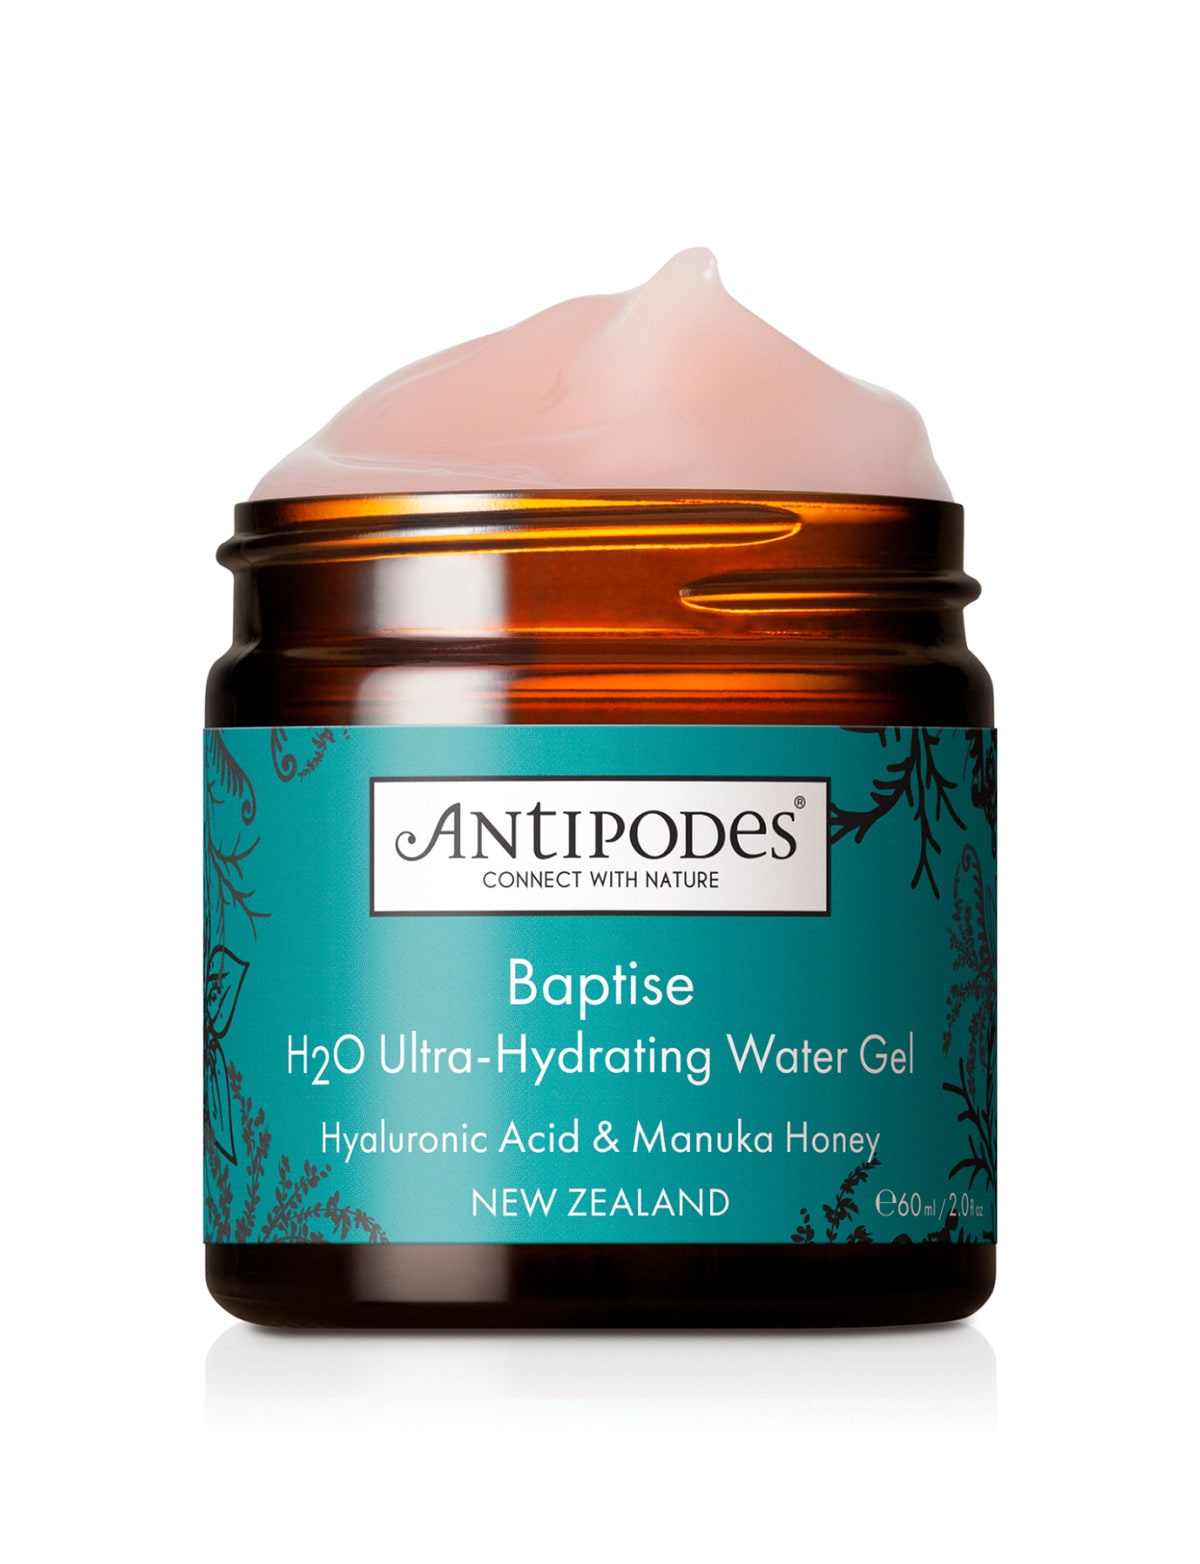 Review: Antipodes, Baptise H20 Ultra-Hydrating Water Gel & Anoint H2O De- Puffing Eye Gel – Pink Wall Blog